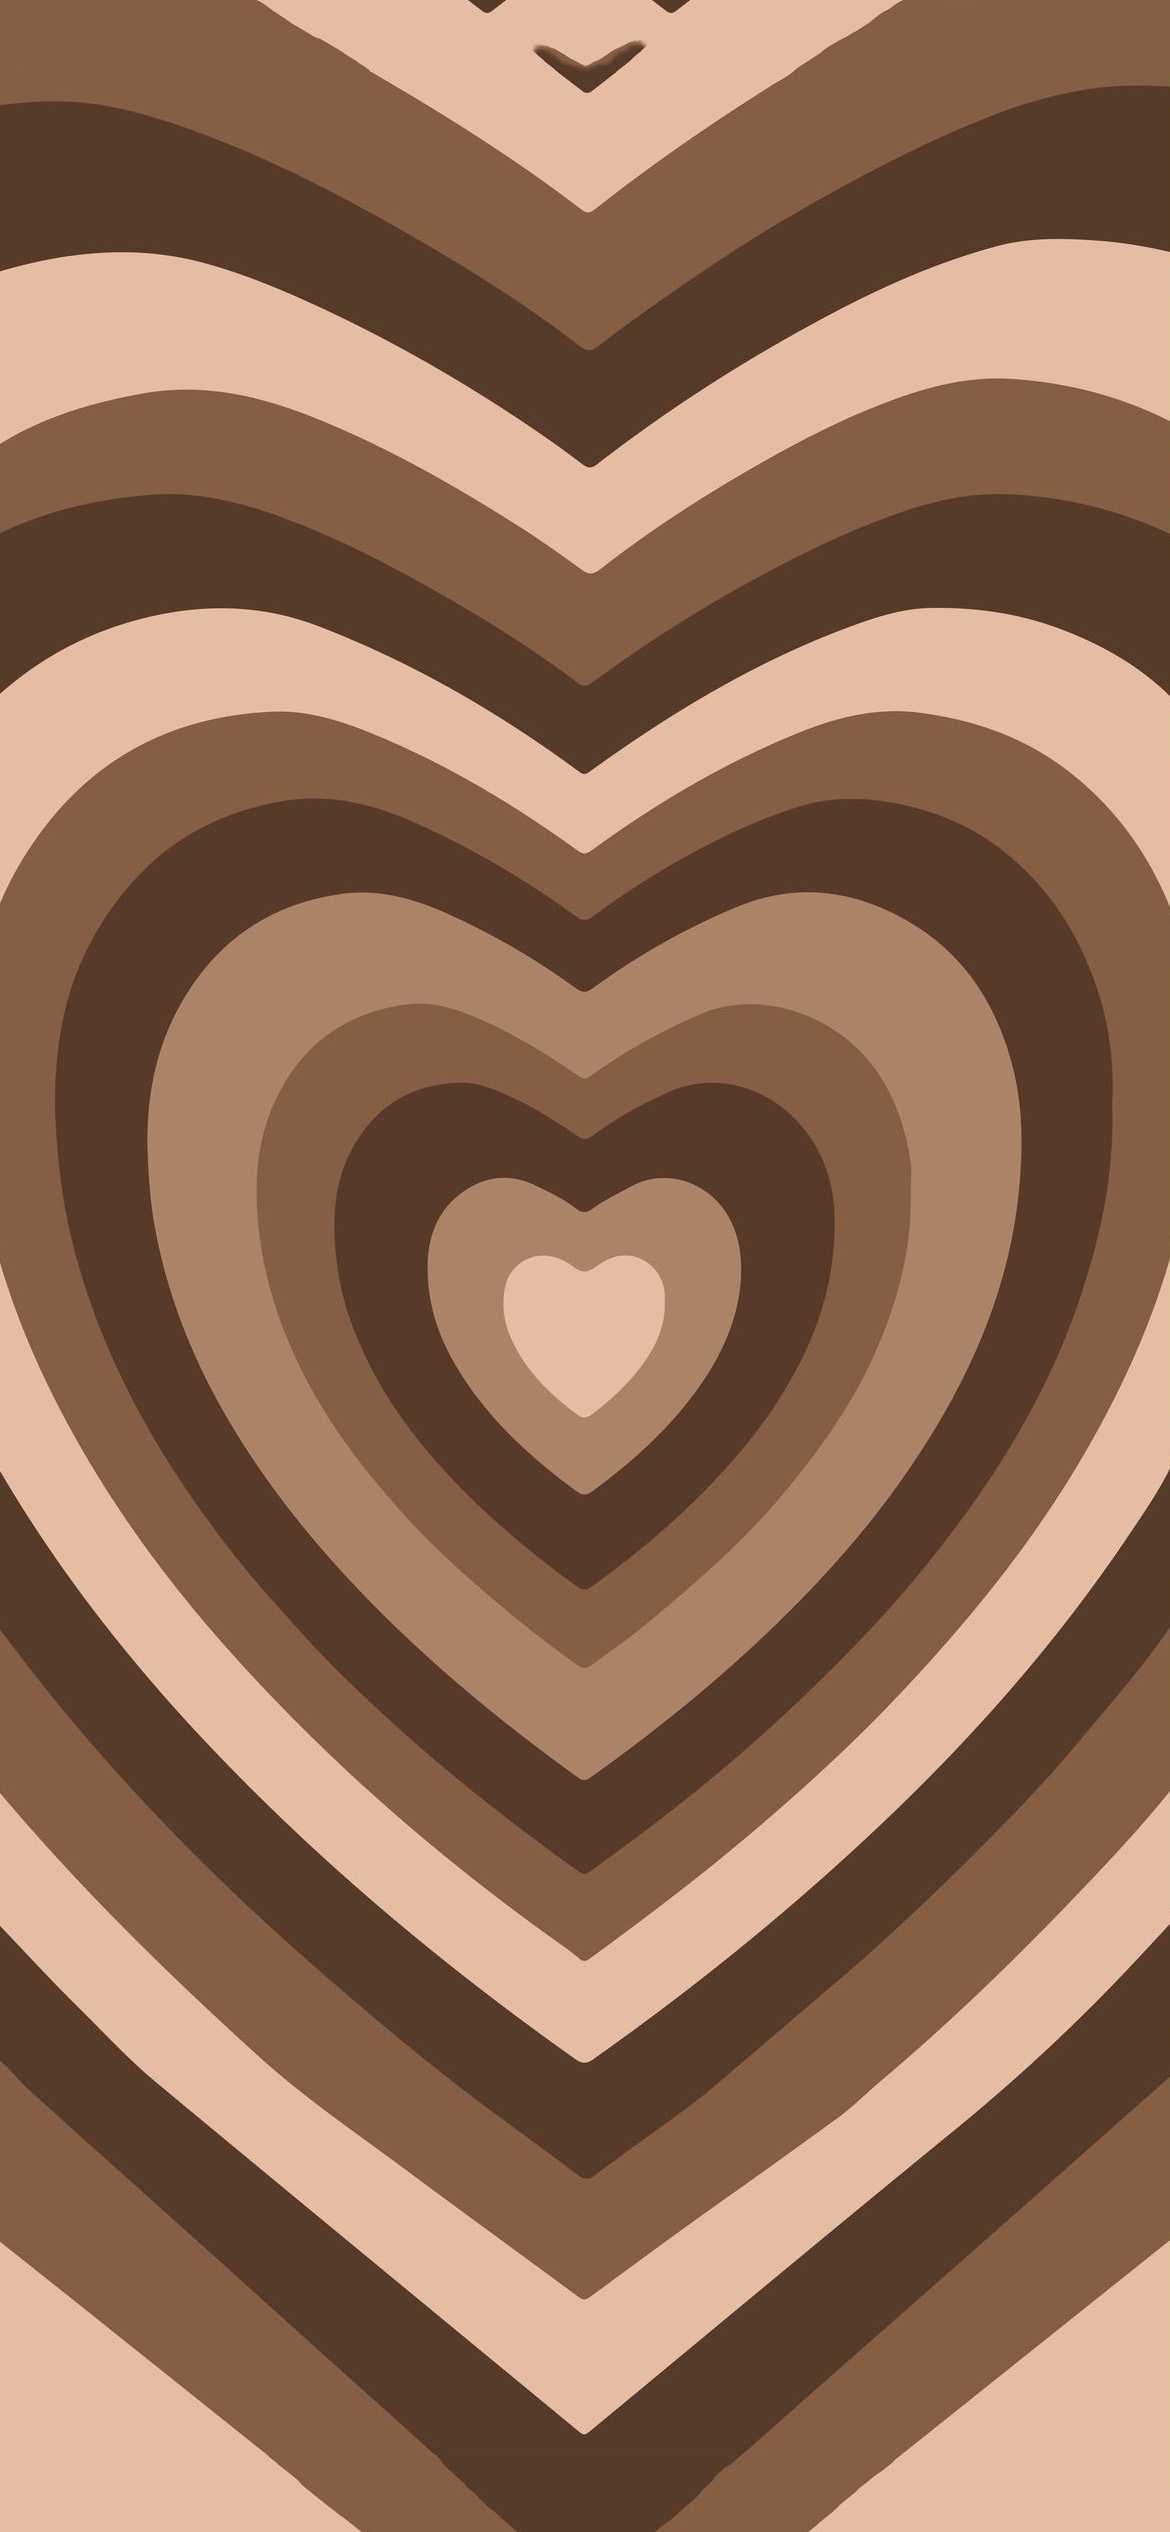 A heart shaped pattern in brown and white - Heart